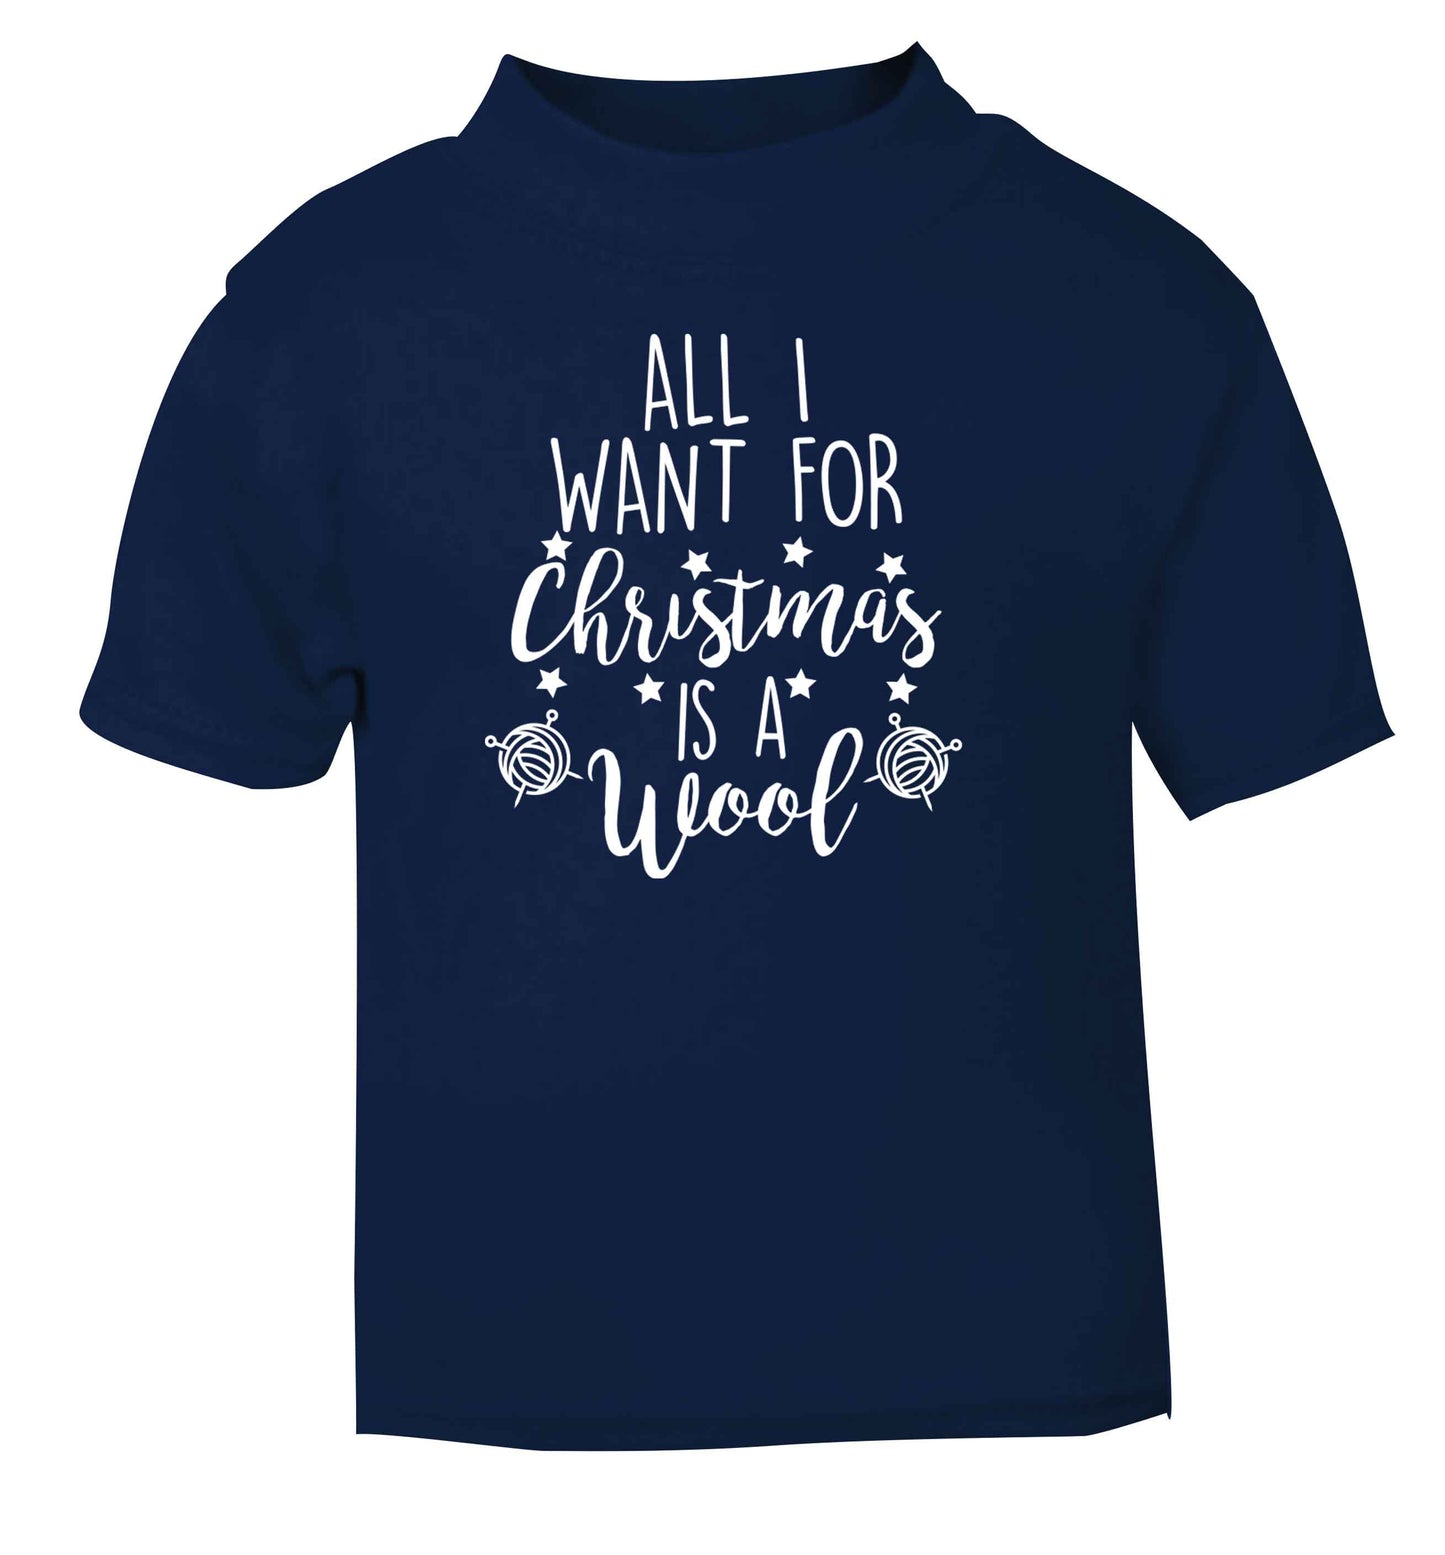 All I want for Christmas is wool! navy Baby Toddler Tshirt 2 Years